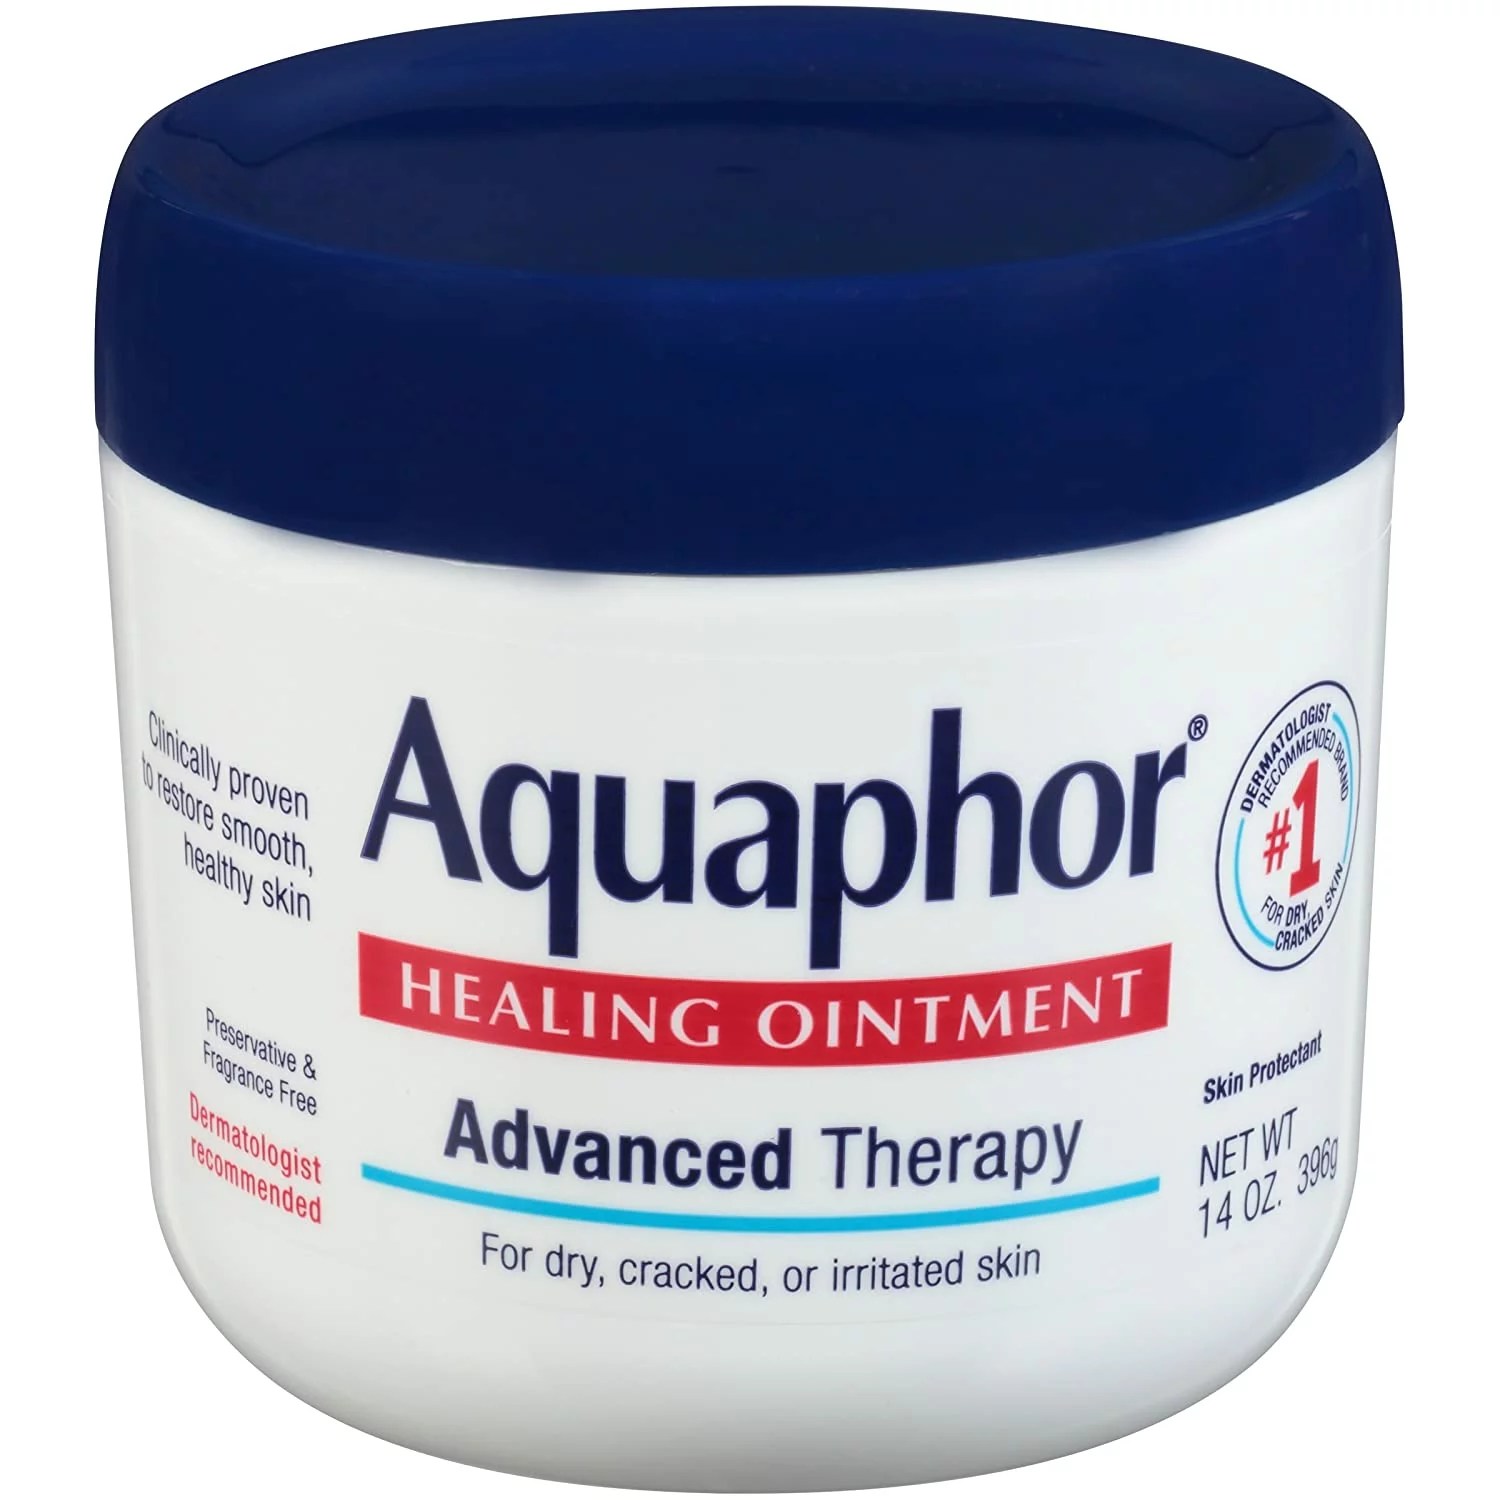 Aquaphor Healing Ointment, dermatologist's favorite skin-care products